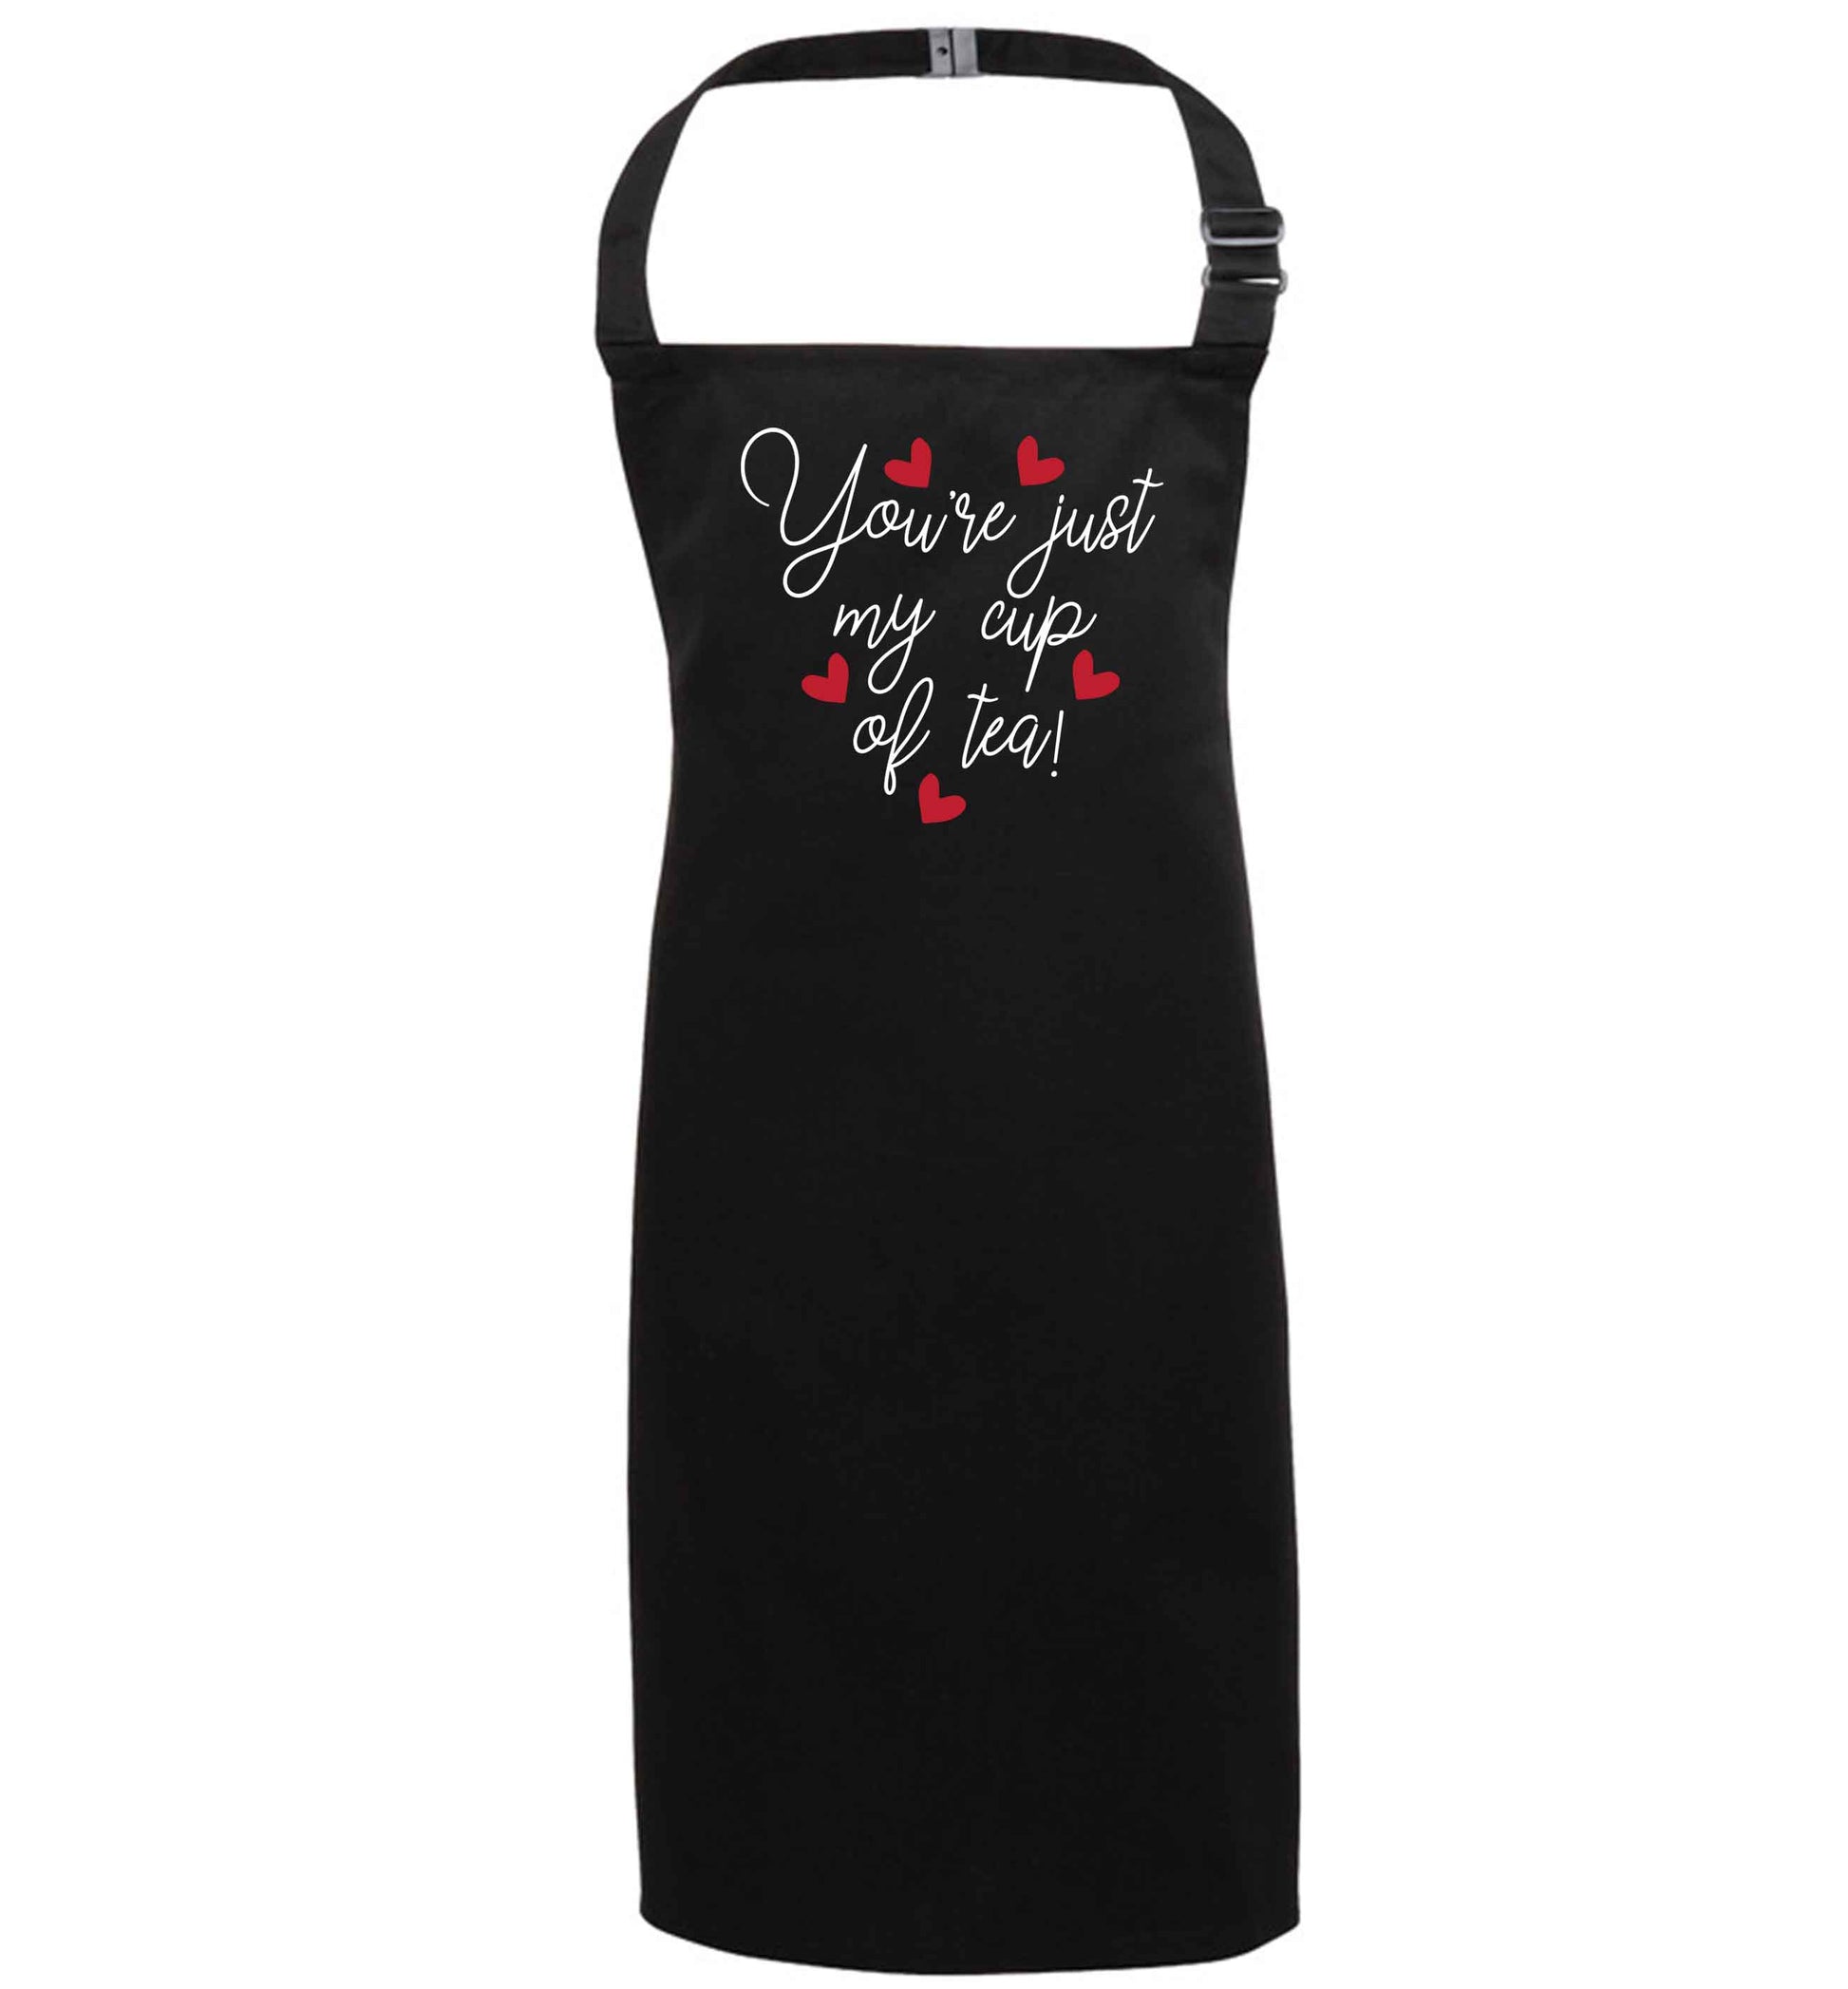 You're just my cup of tea black apron 7-10 years